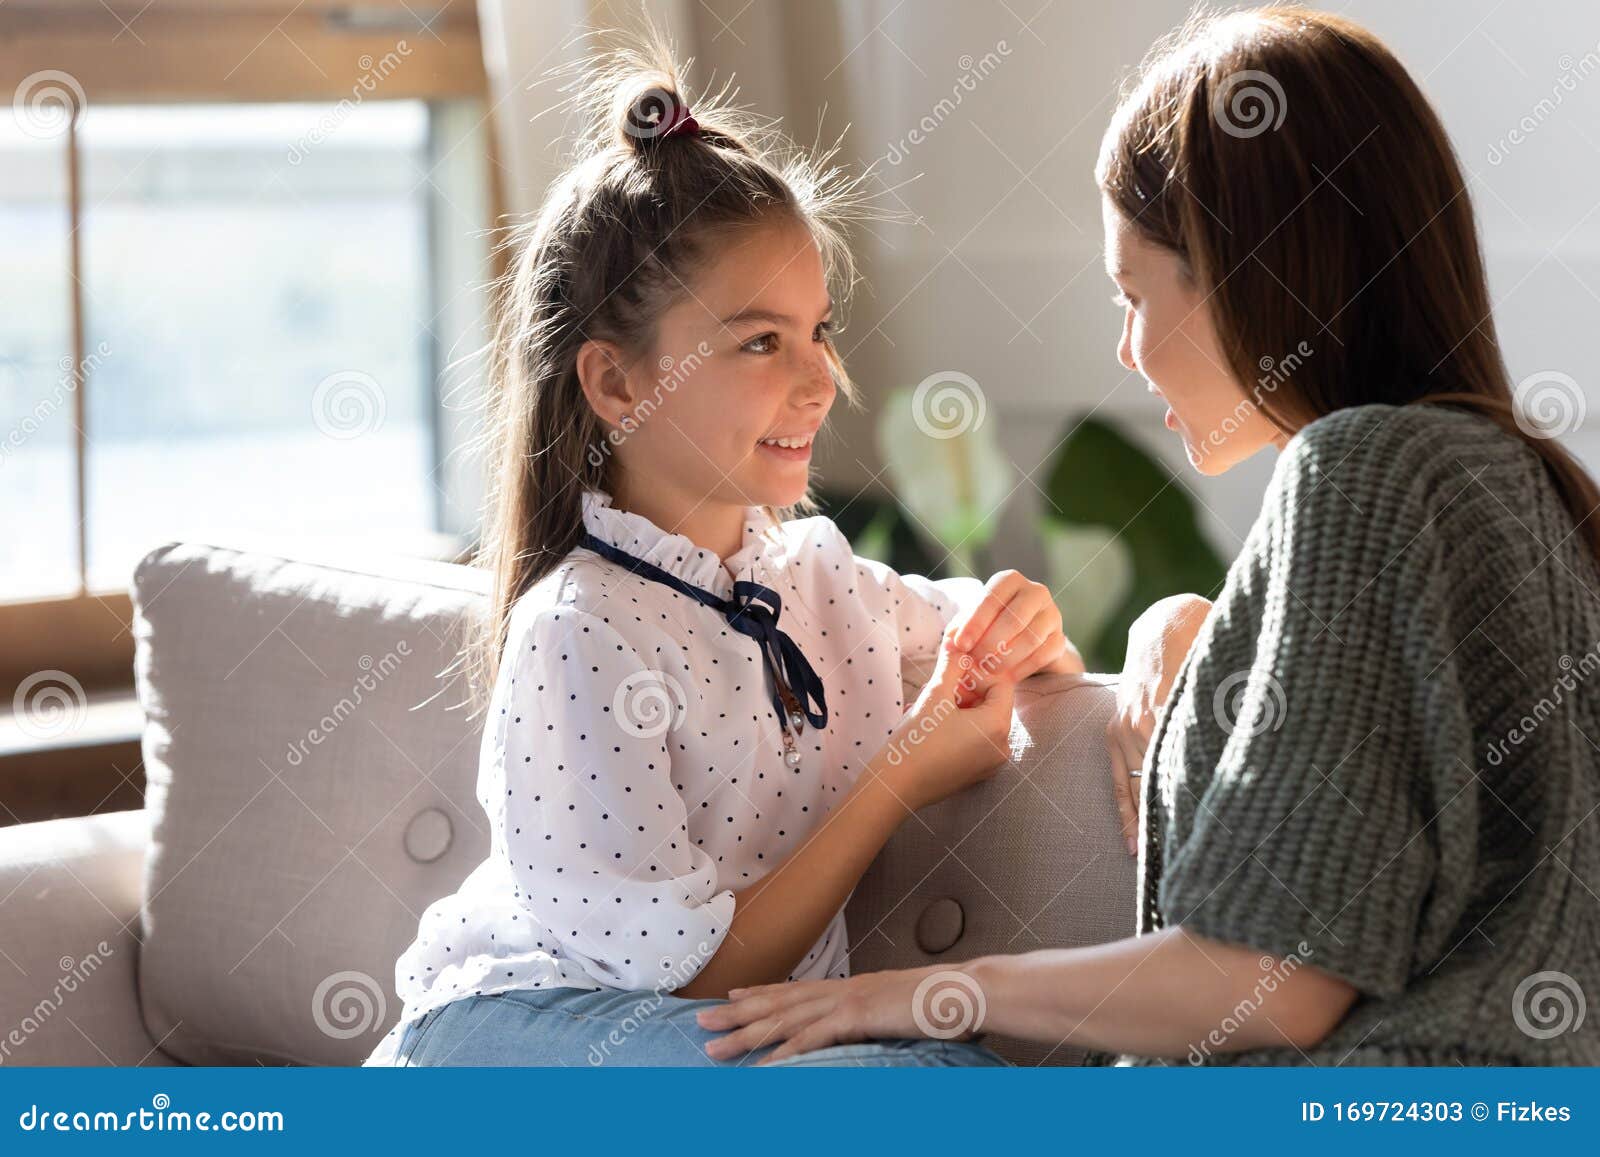 Loving Young Mom And Little Daughter Share Secrets On Couch Stock Image